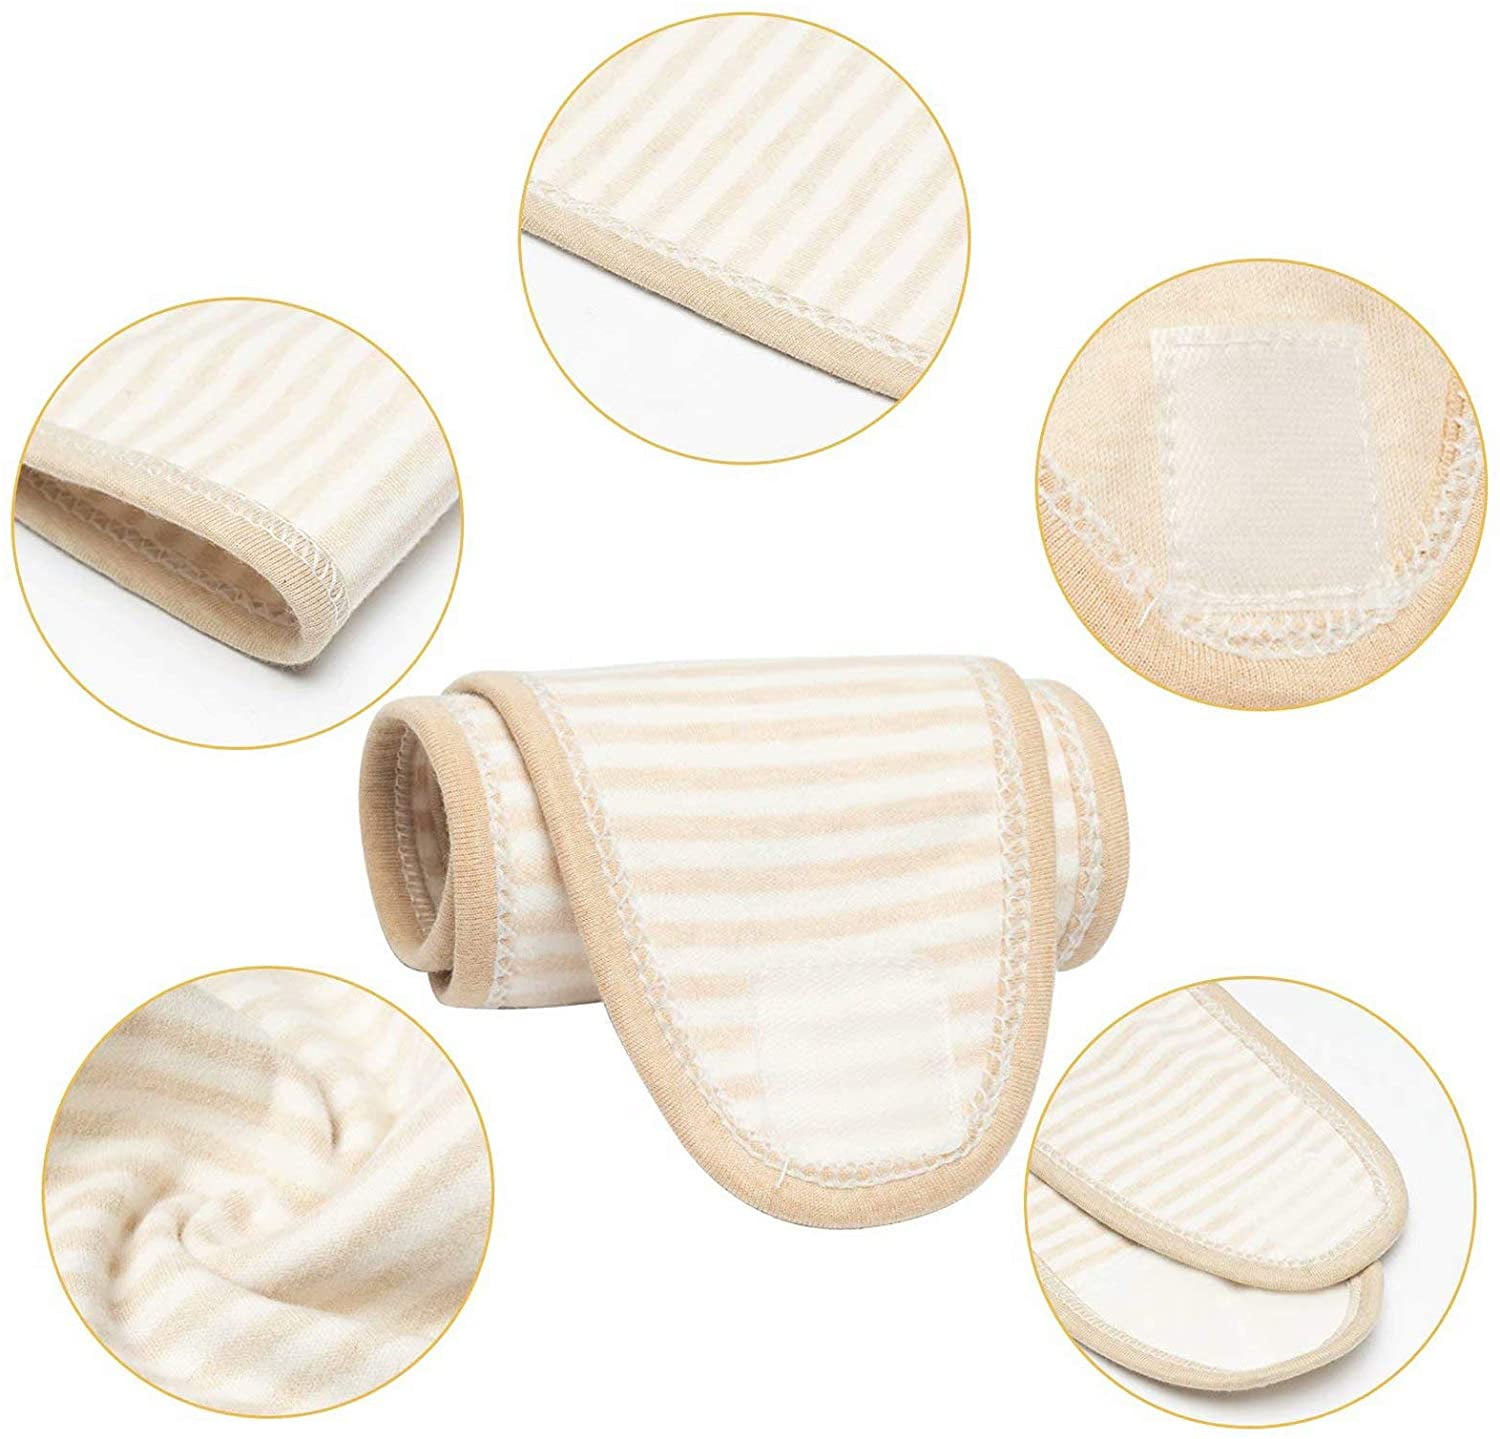 3Pcs Baby Infant Newborn Cotton White Belly Umbilical Cord Care Warm Protector 